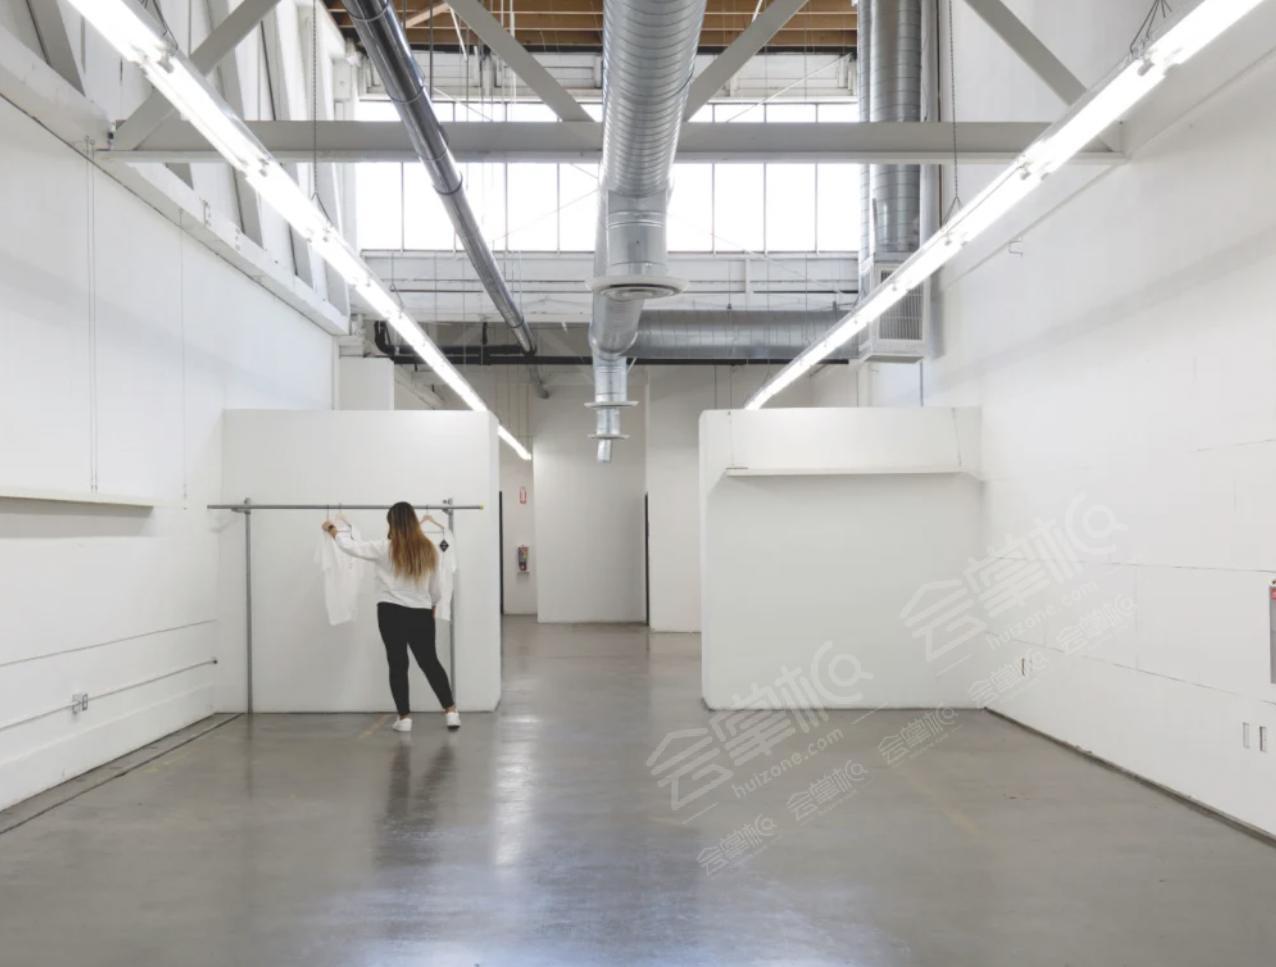 Storage & Co-Working Spaces